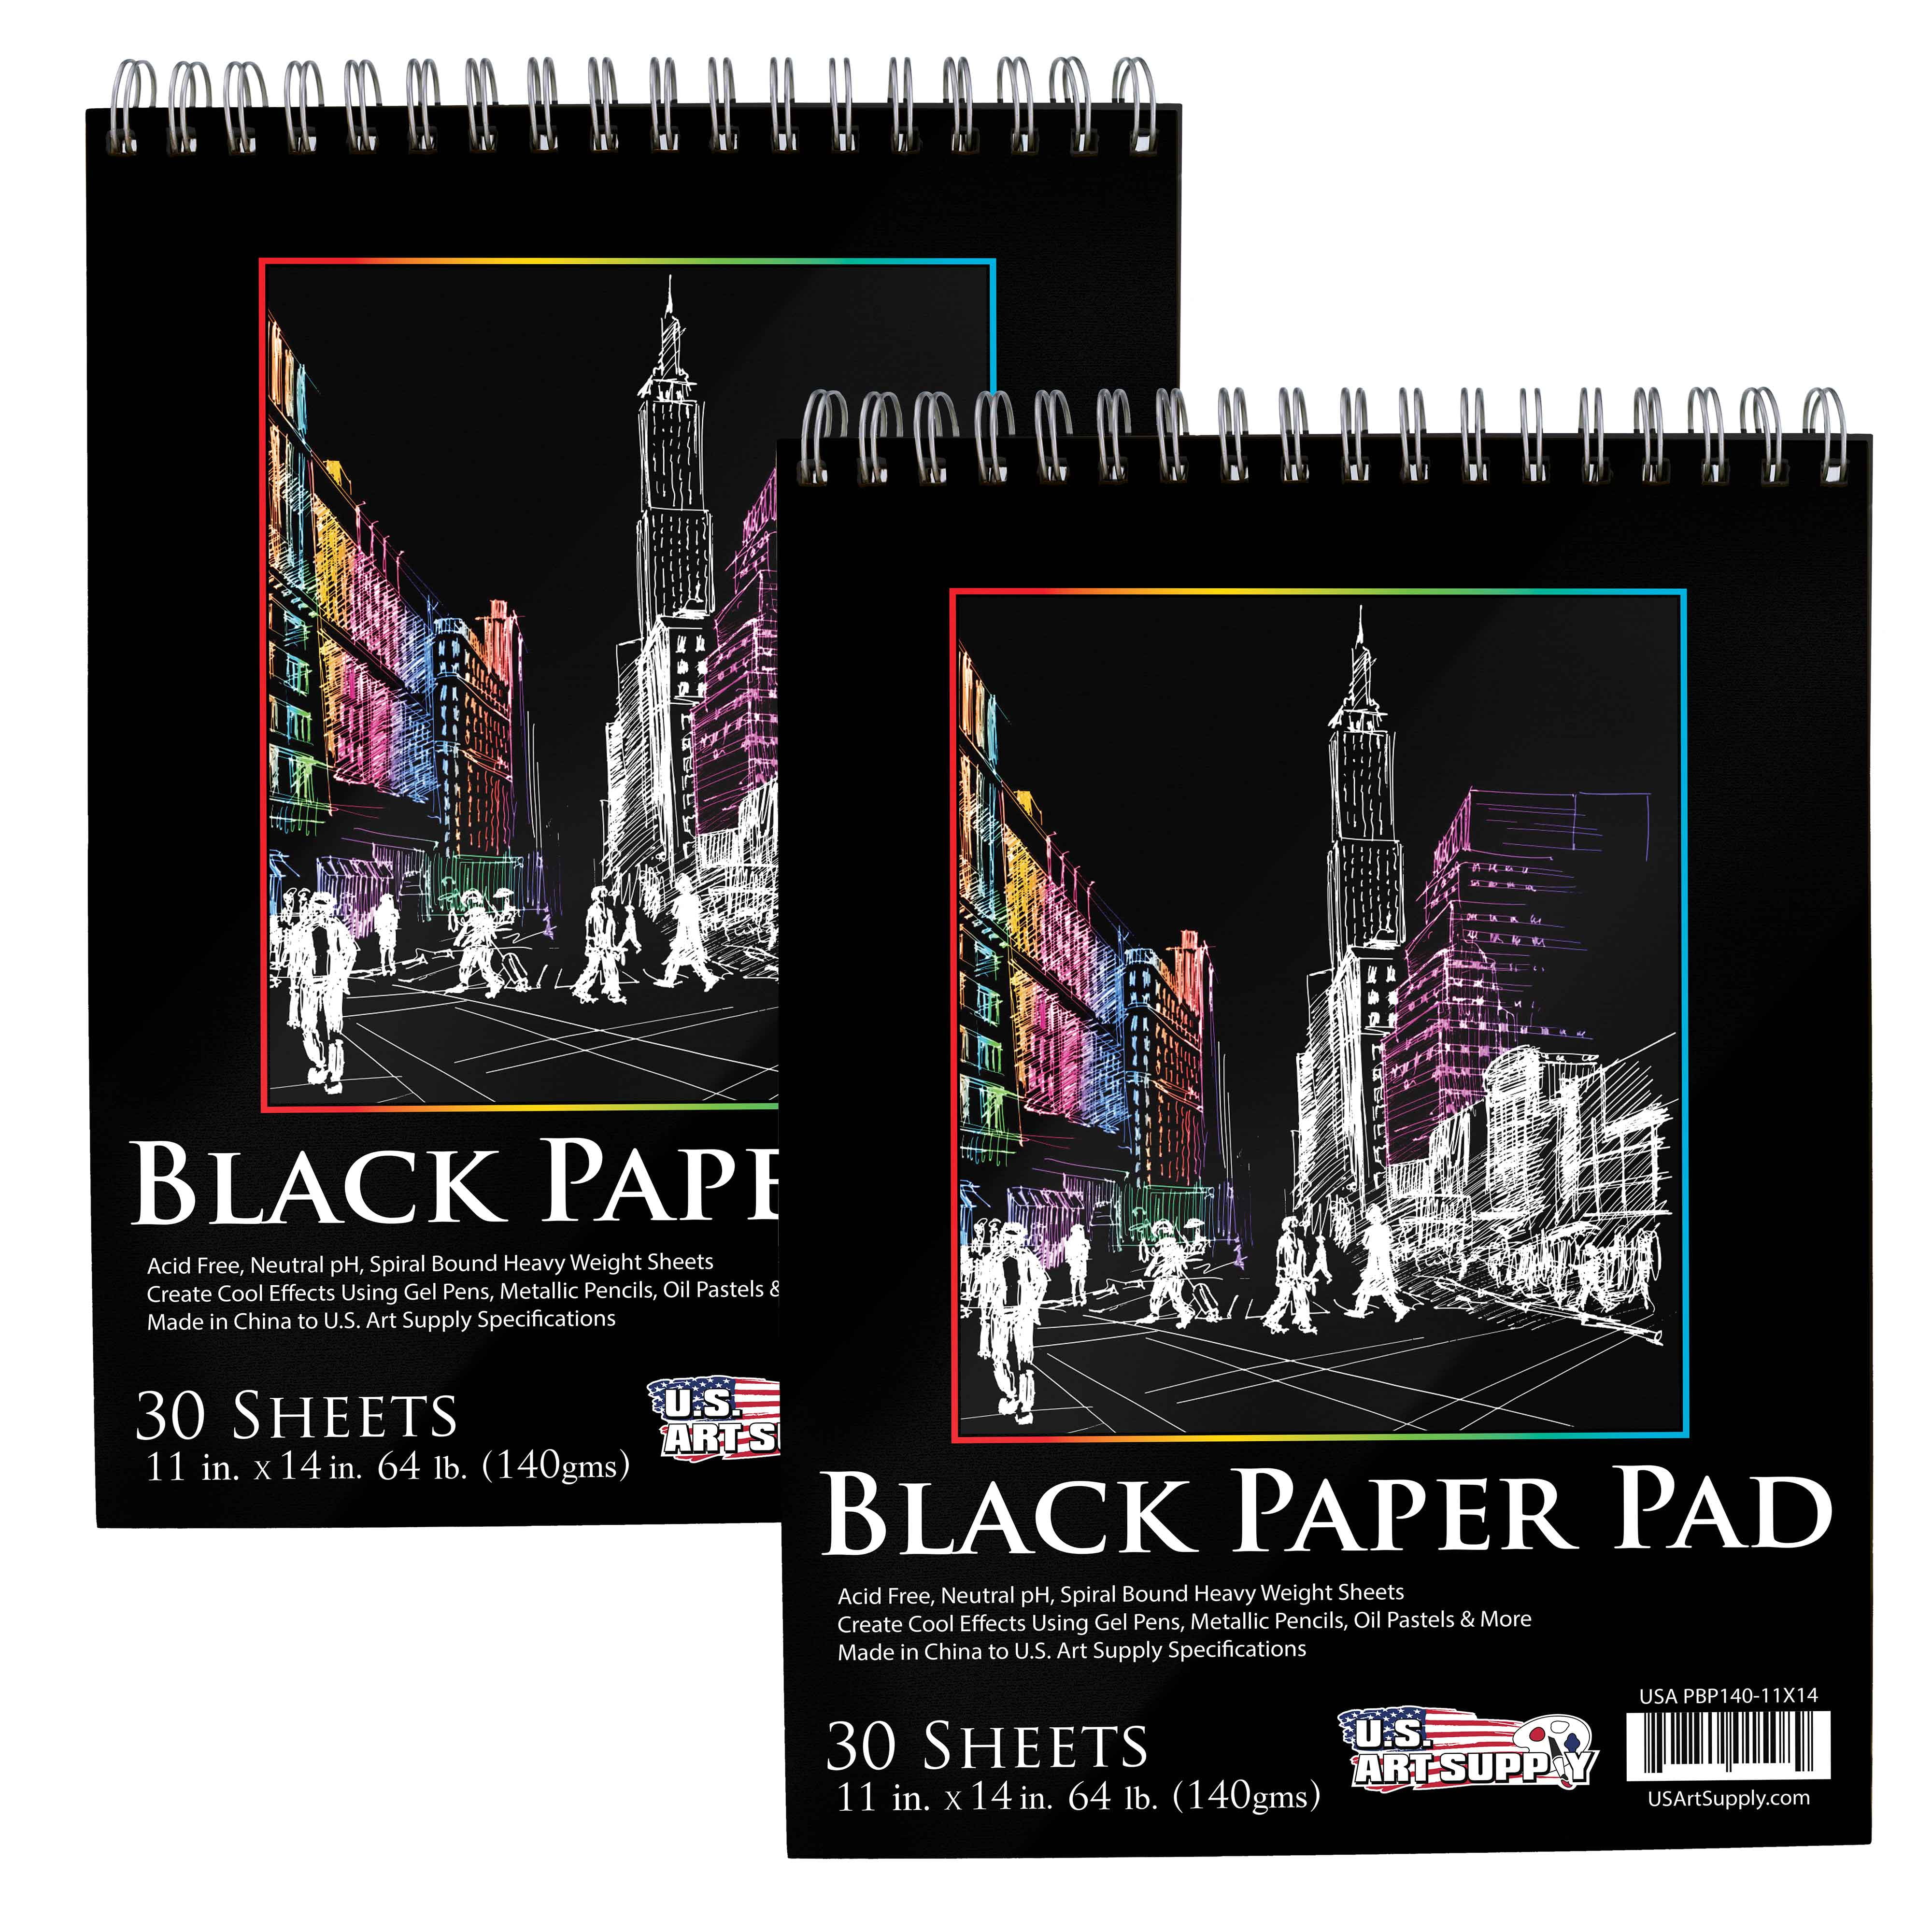  U.S. Art Supply 11 x 14 Top Spiral Bound Sketch Book Pad,  Pack of 2, 100 Sheets Each, 60lb (100gsm) - Artist Sketching Drawing Pad,  Acid-Free - Graphite Colored Pencils, Charcoal 